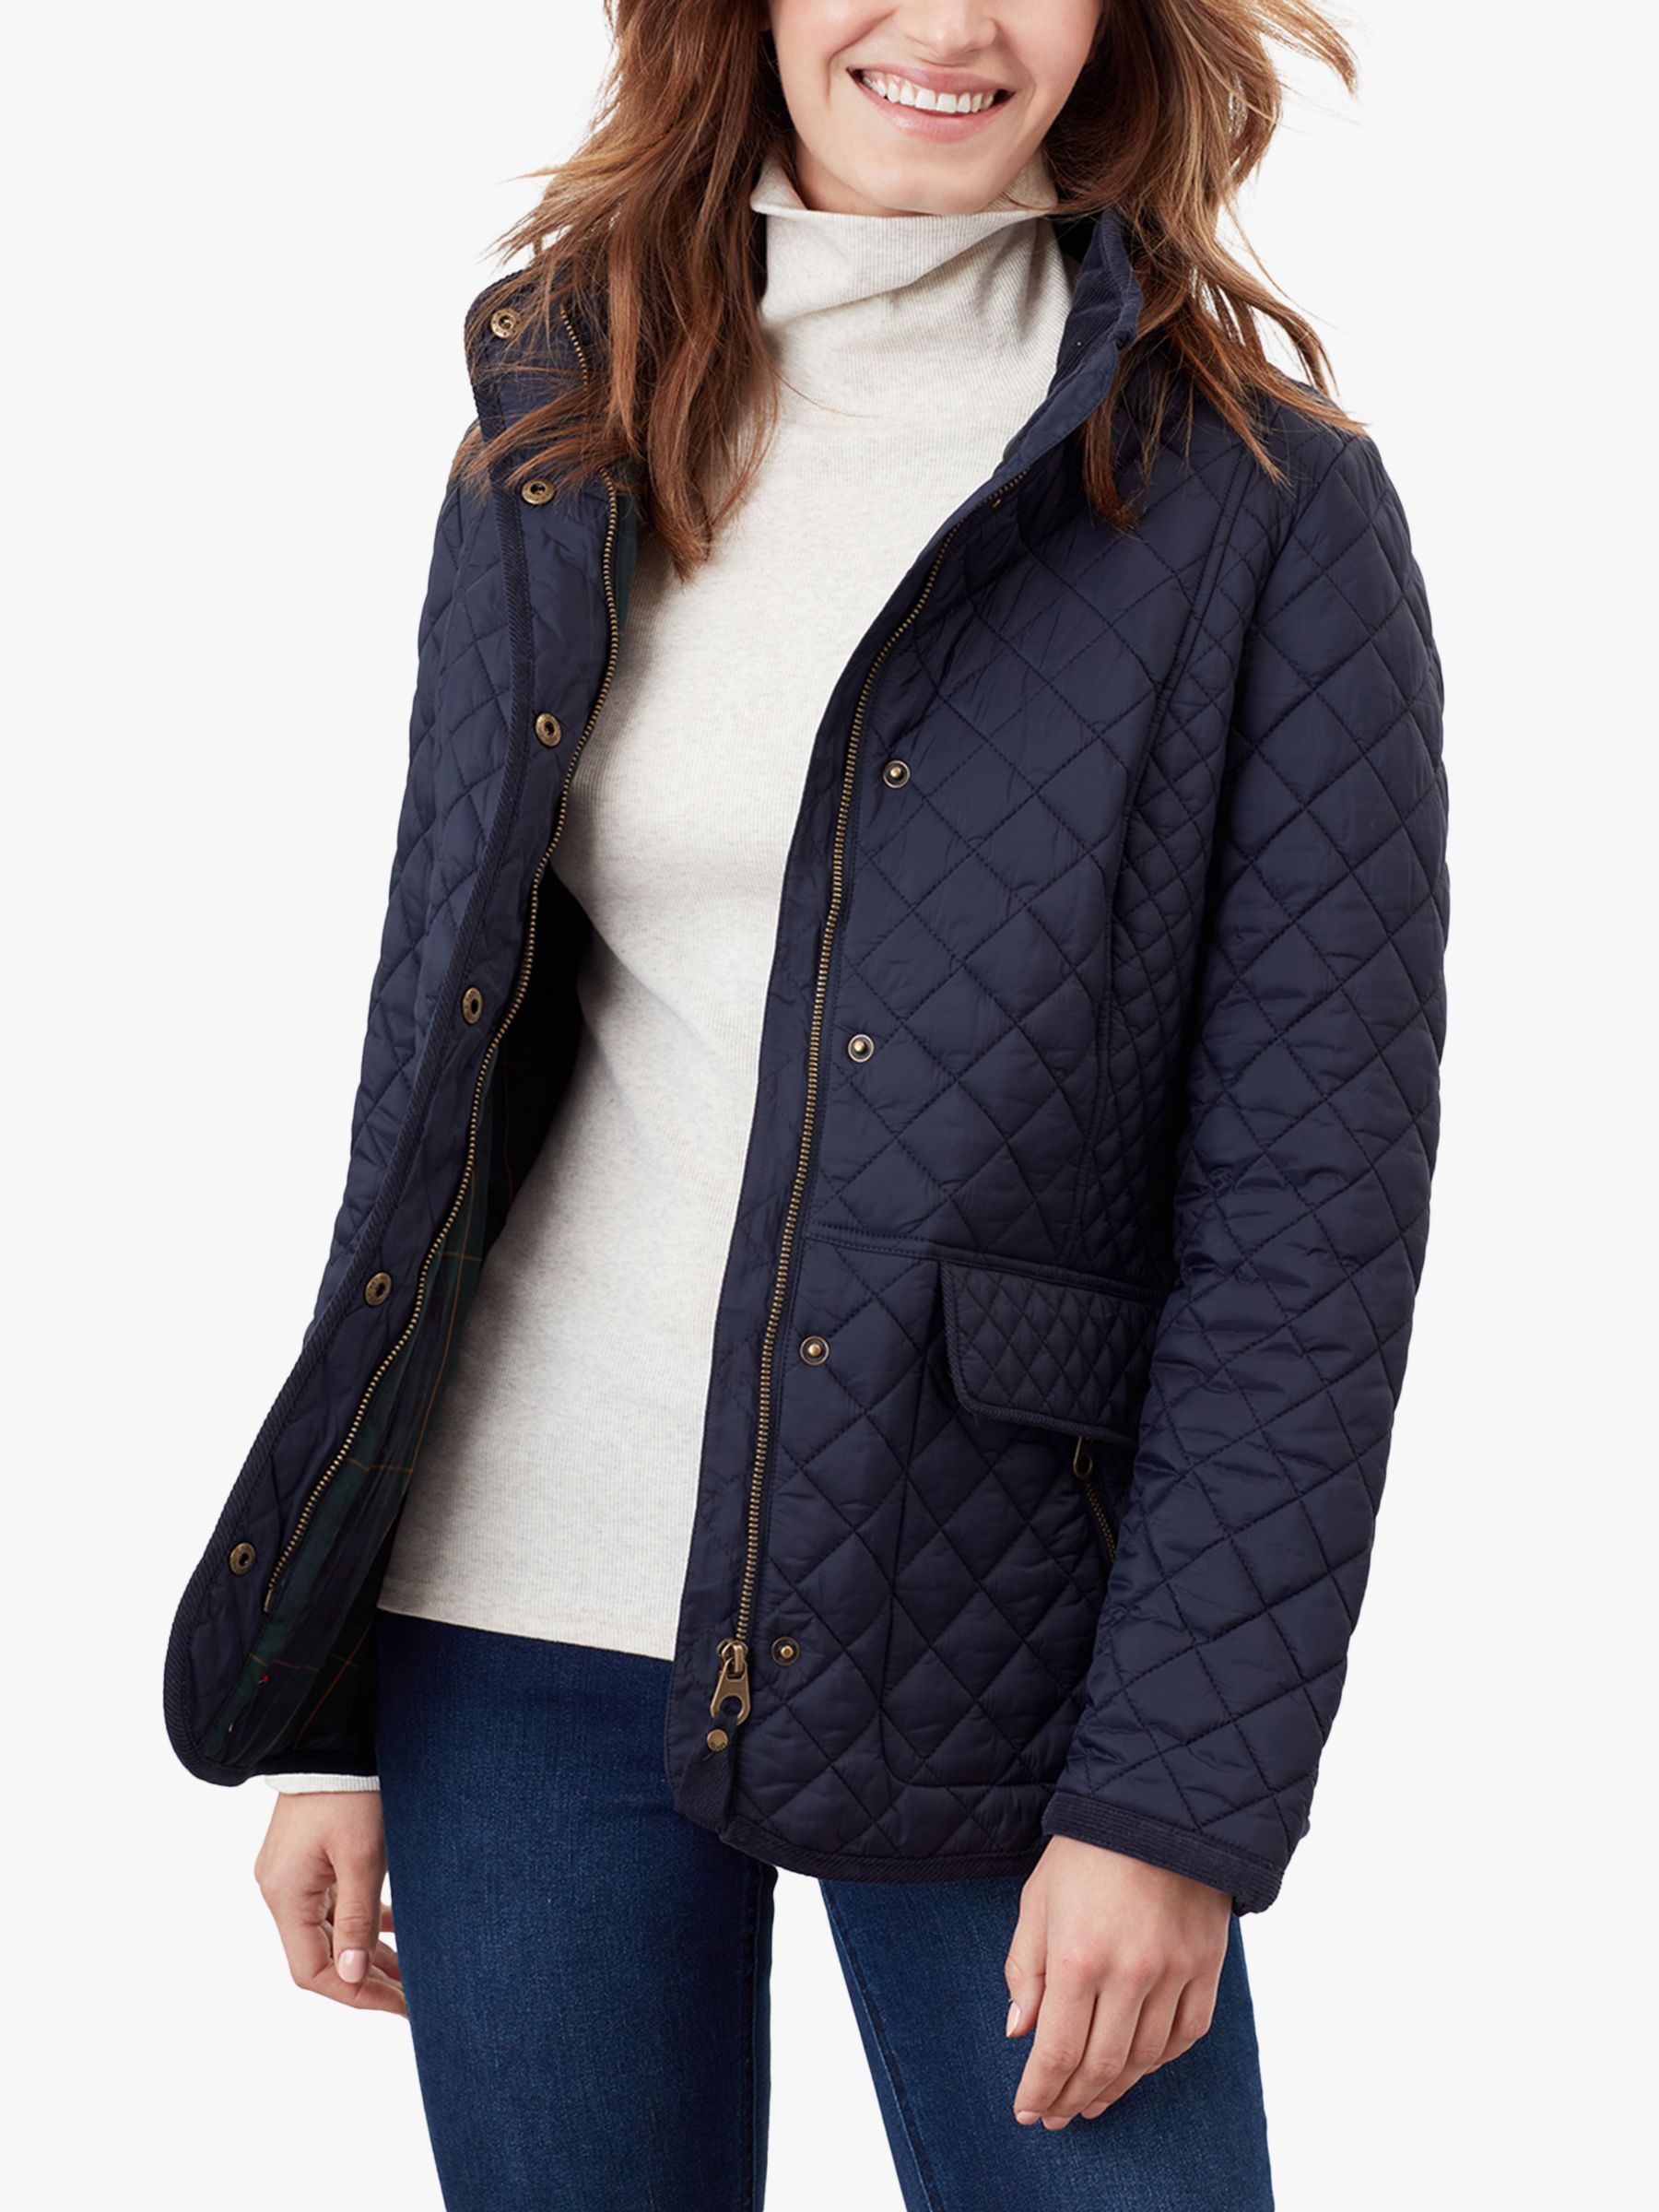 Women's Joules Quilted Coats \u0026 Jackets 